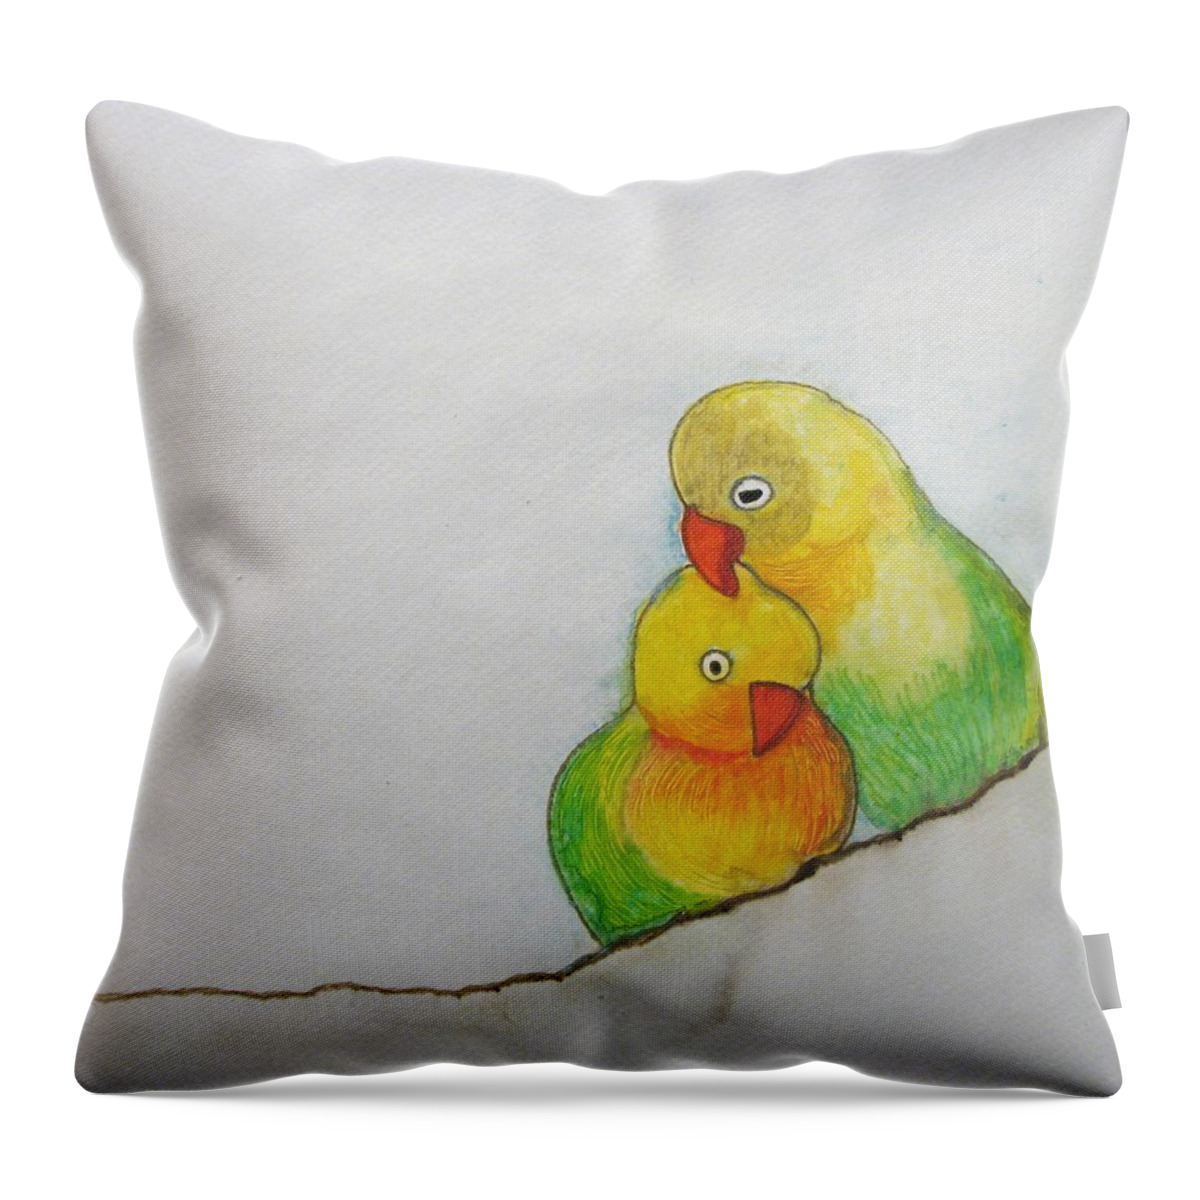 Parakeet Throw Pillow featuring the painting I Love You by Patricia Arroyo